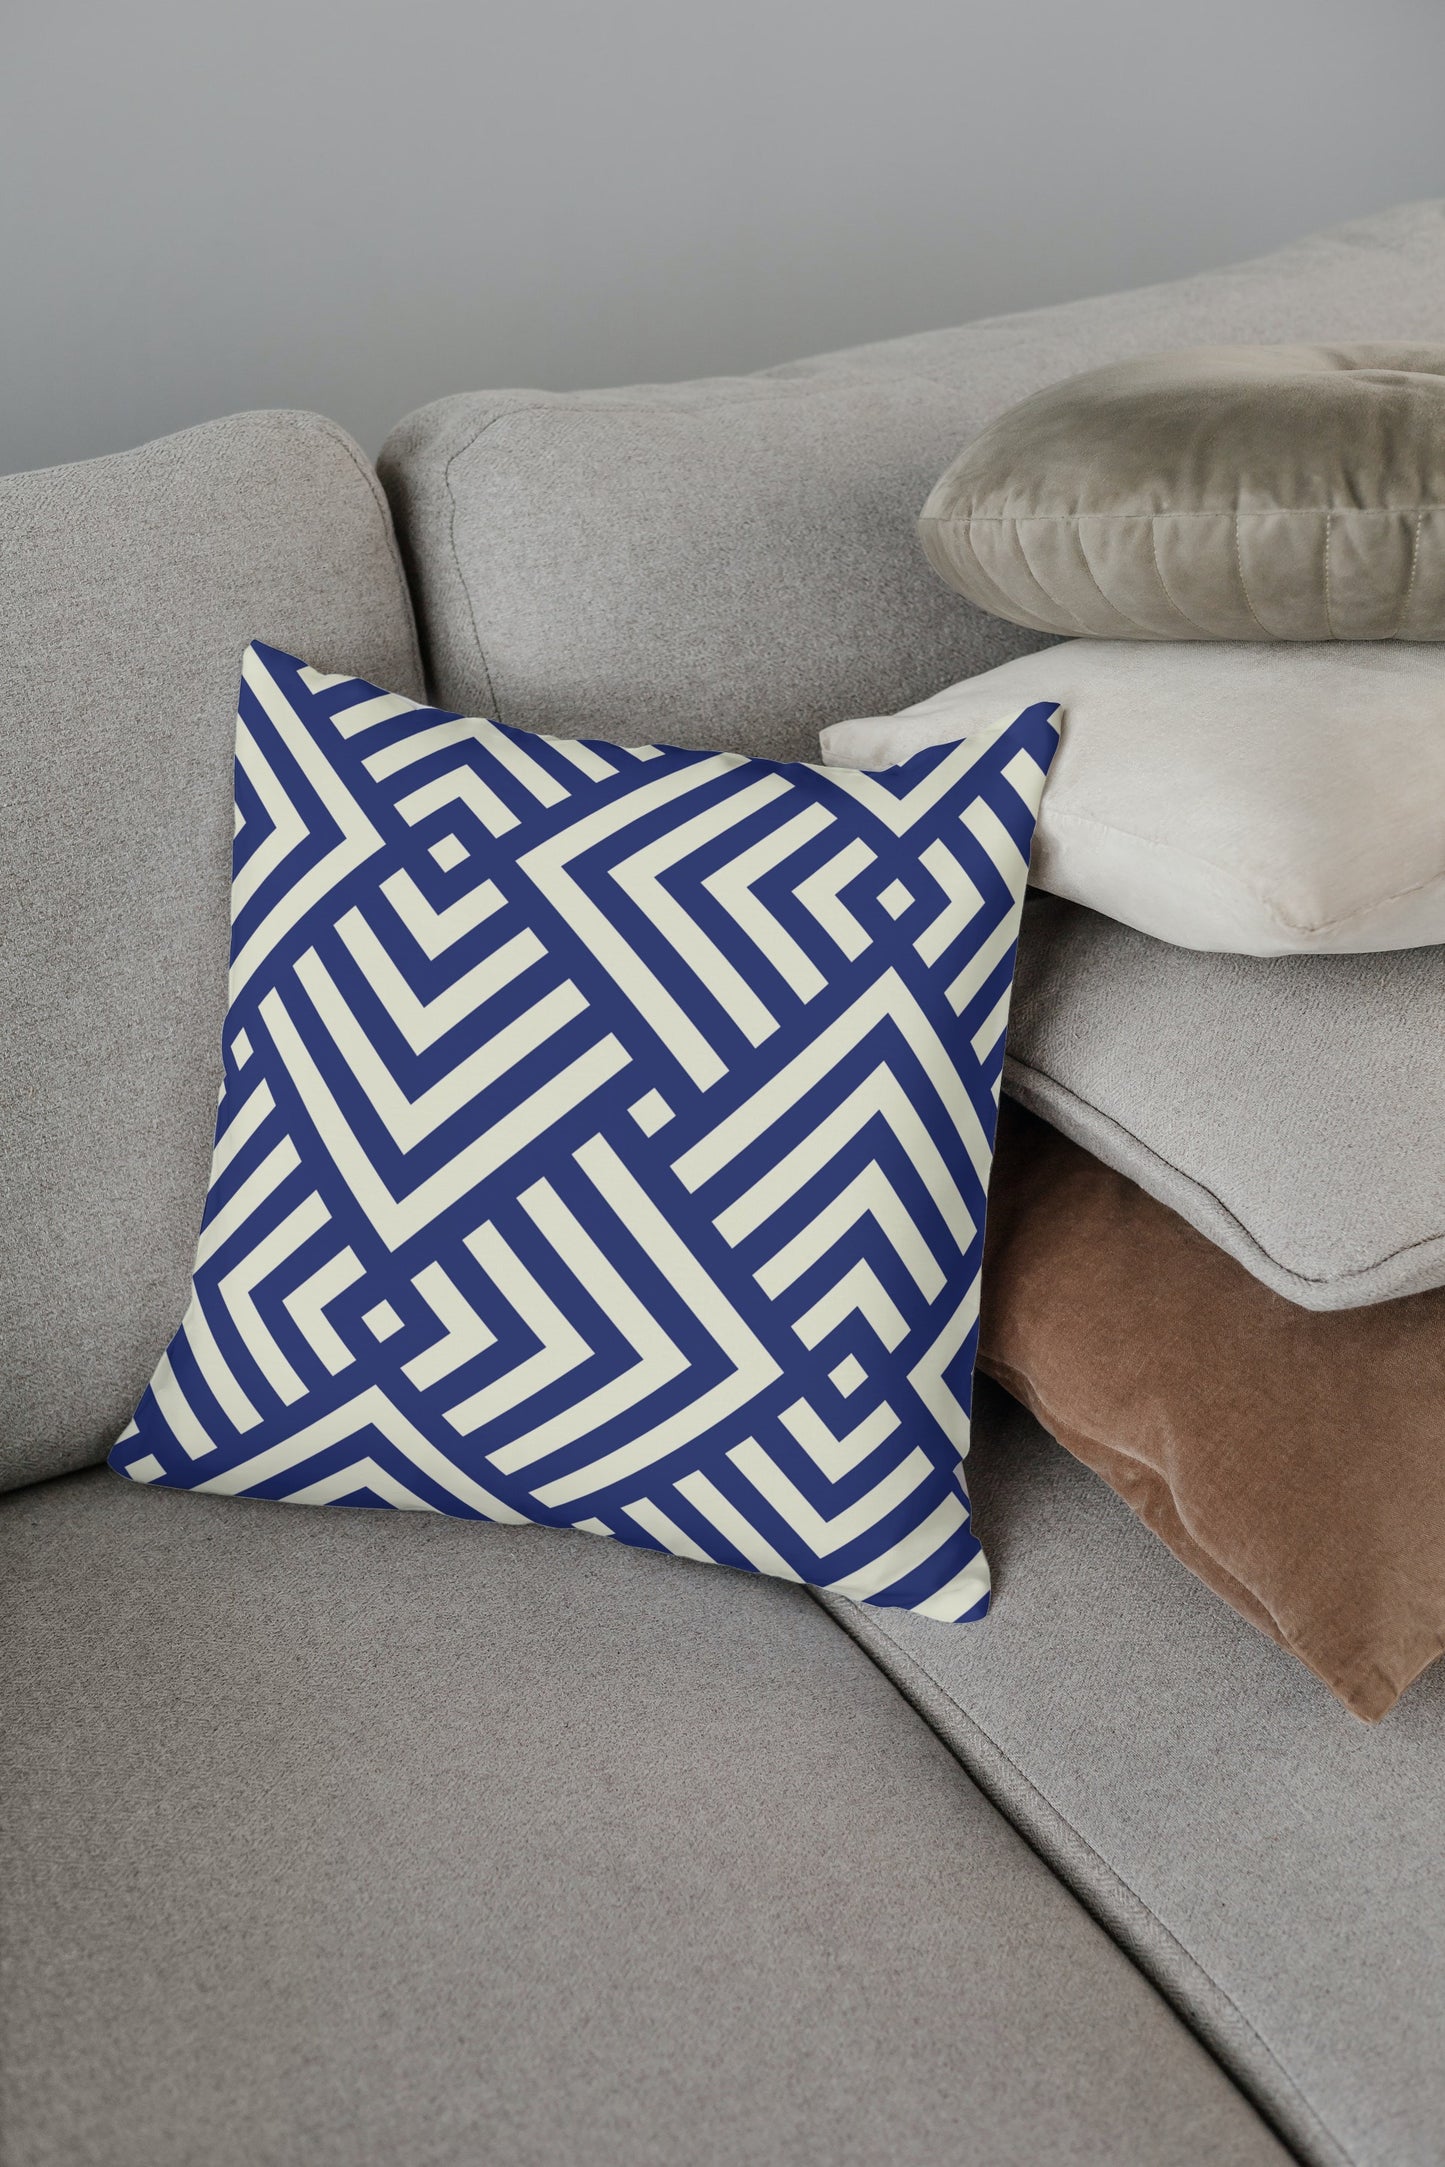 Abstract Geometric Outdoor Pillows Navy Blue & White